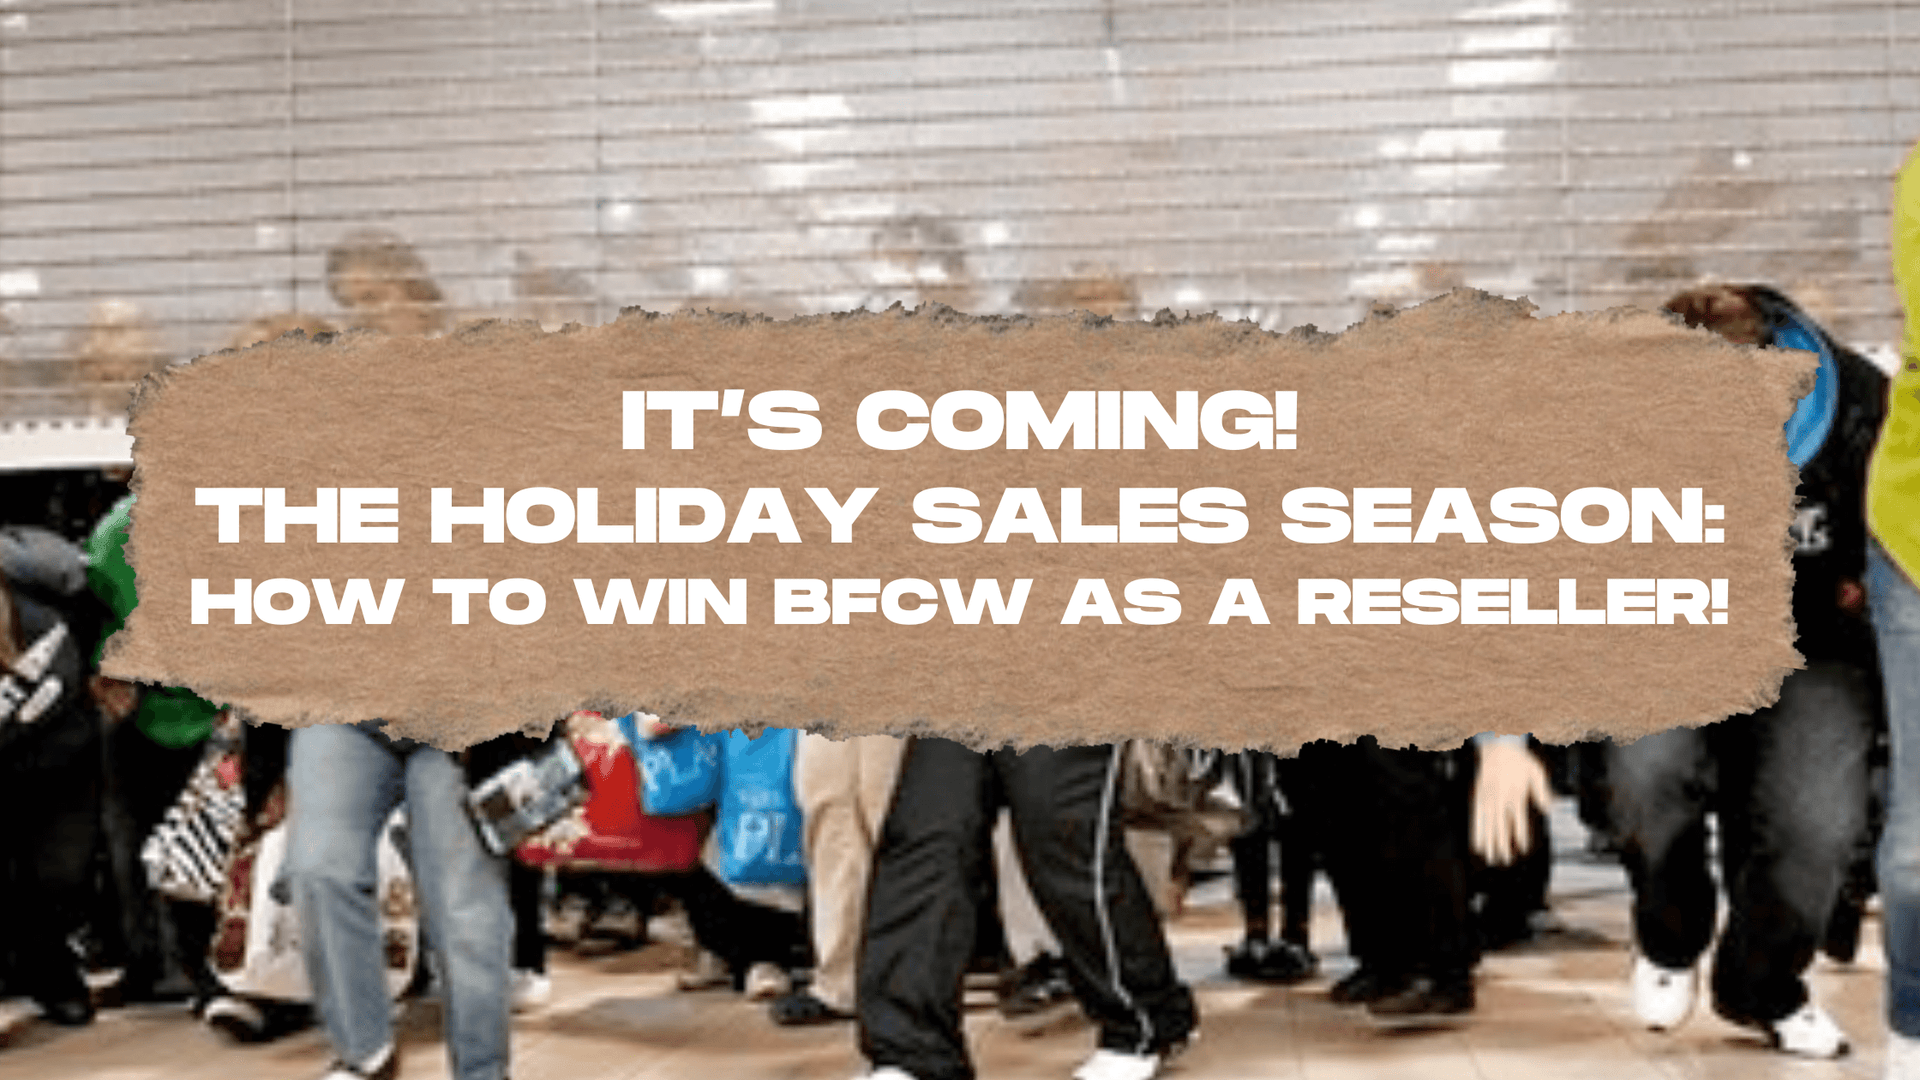 It's Coming! The holiday sales season: How to win BFCW